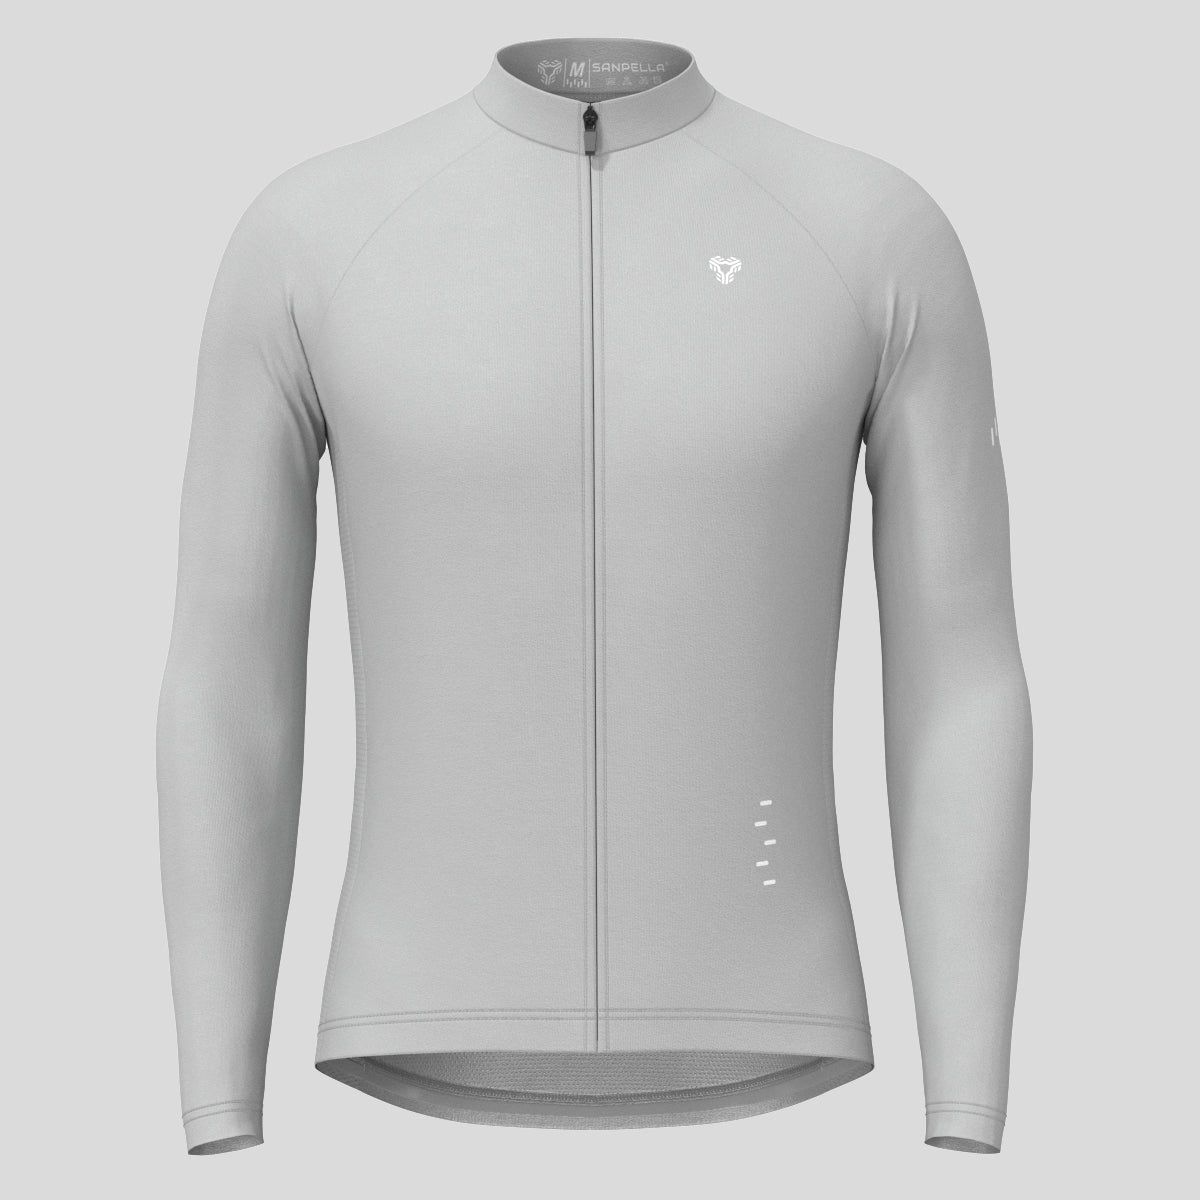 Men's Minimal Solid LS Cycling Jersey - Gray